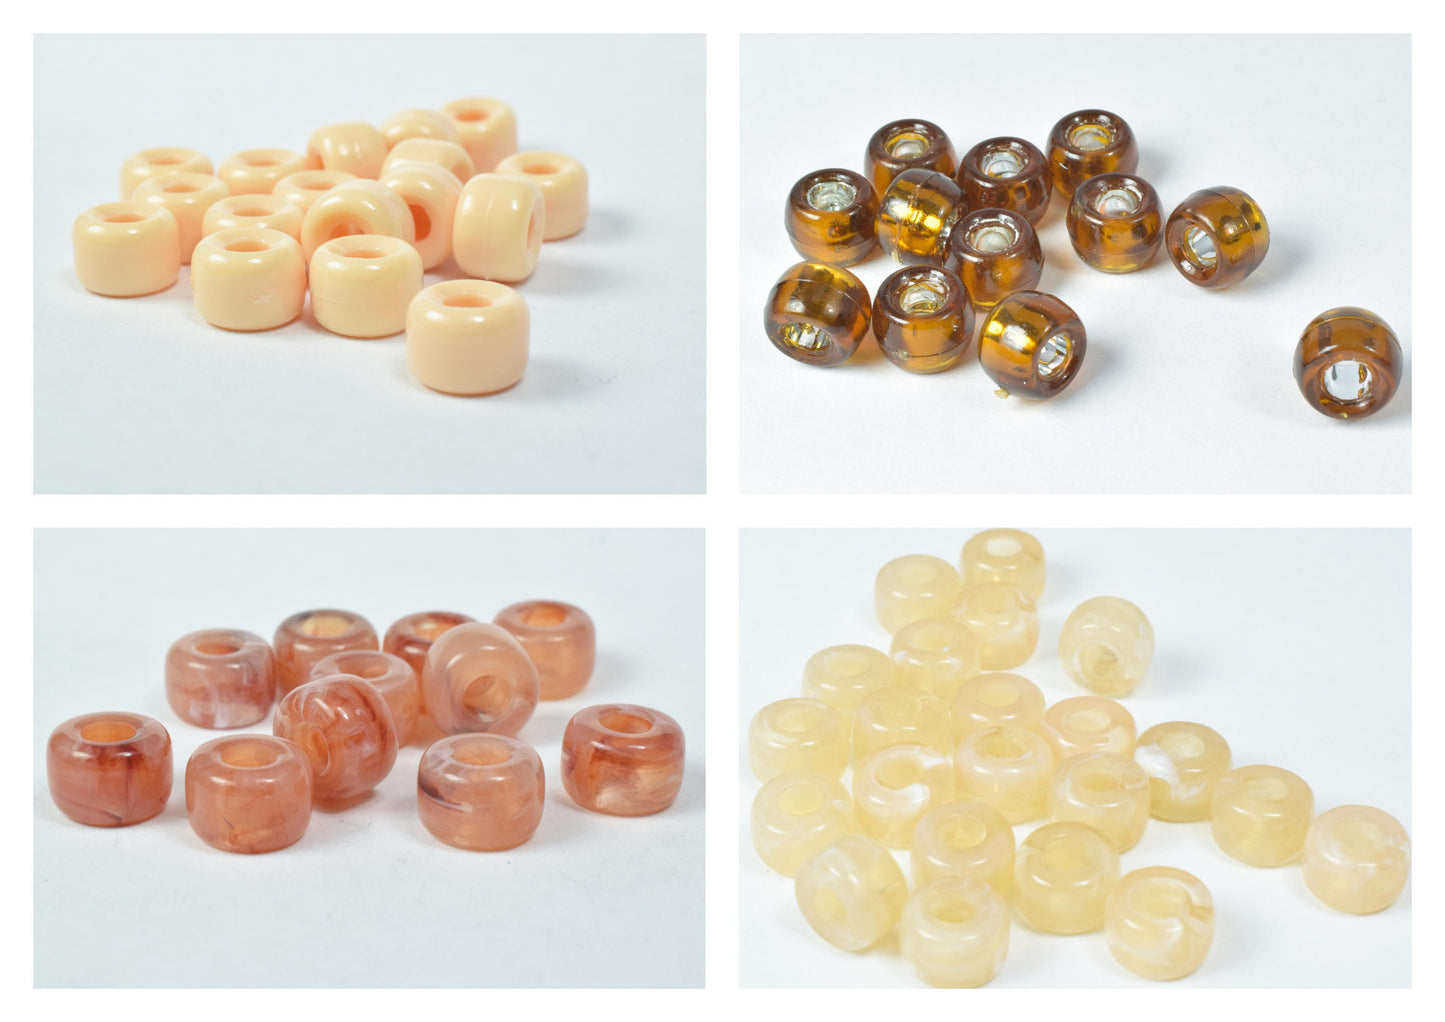 9mm Plastic Pony Beads with smooth surface, Hole size may slightly vary, Wholesale Pony Beads, Vintage plastic beads,